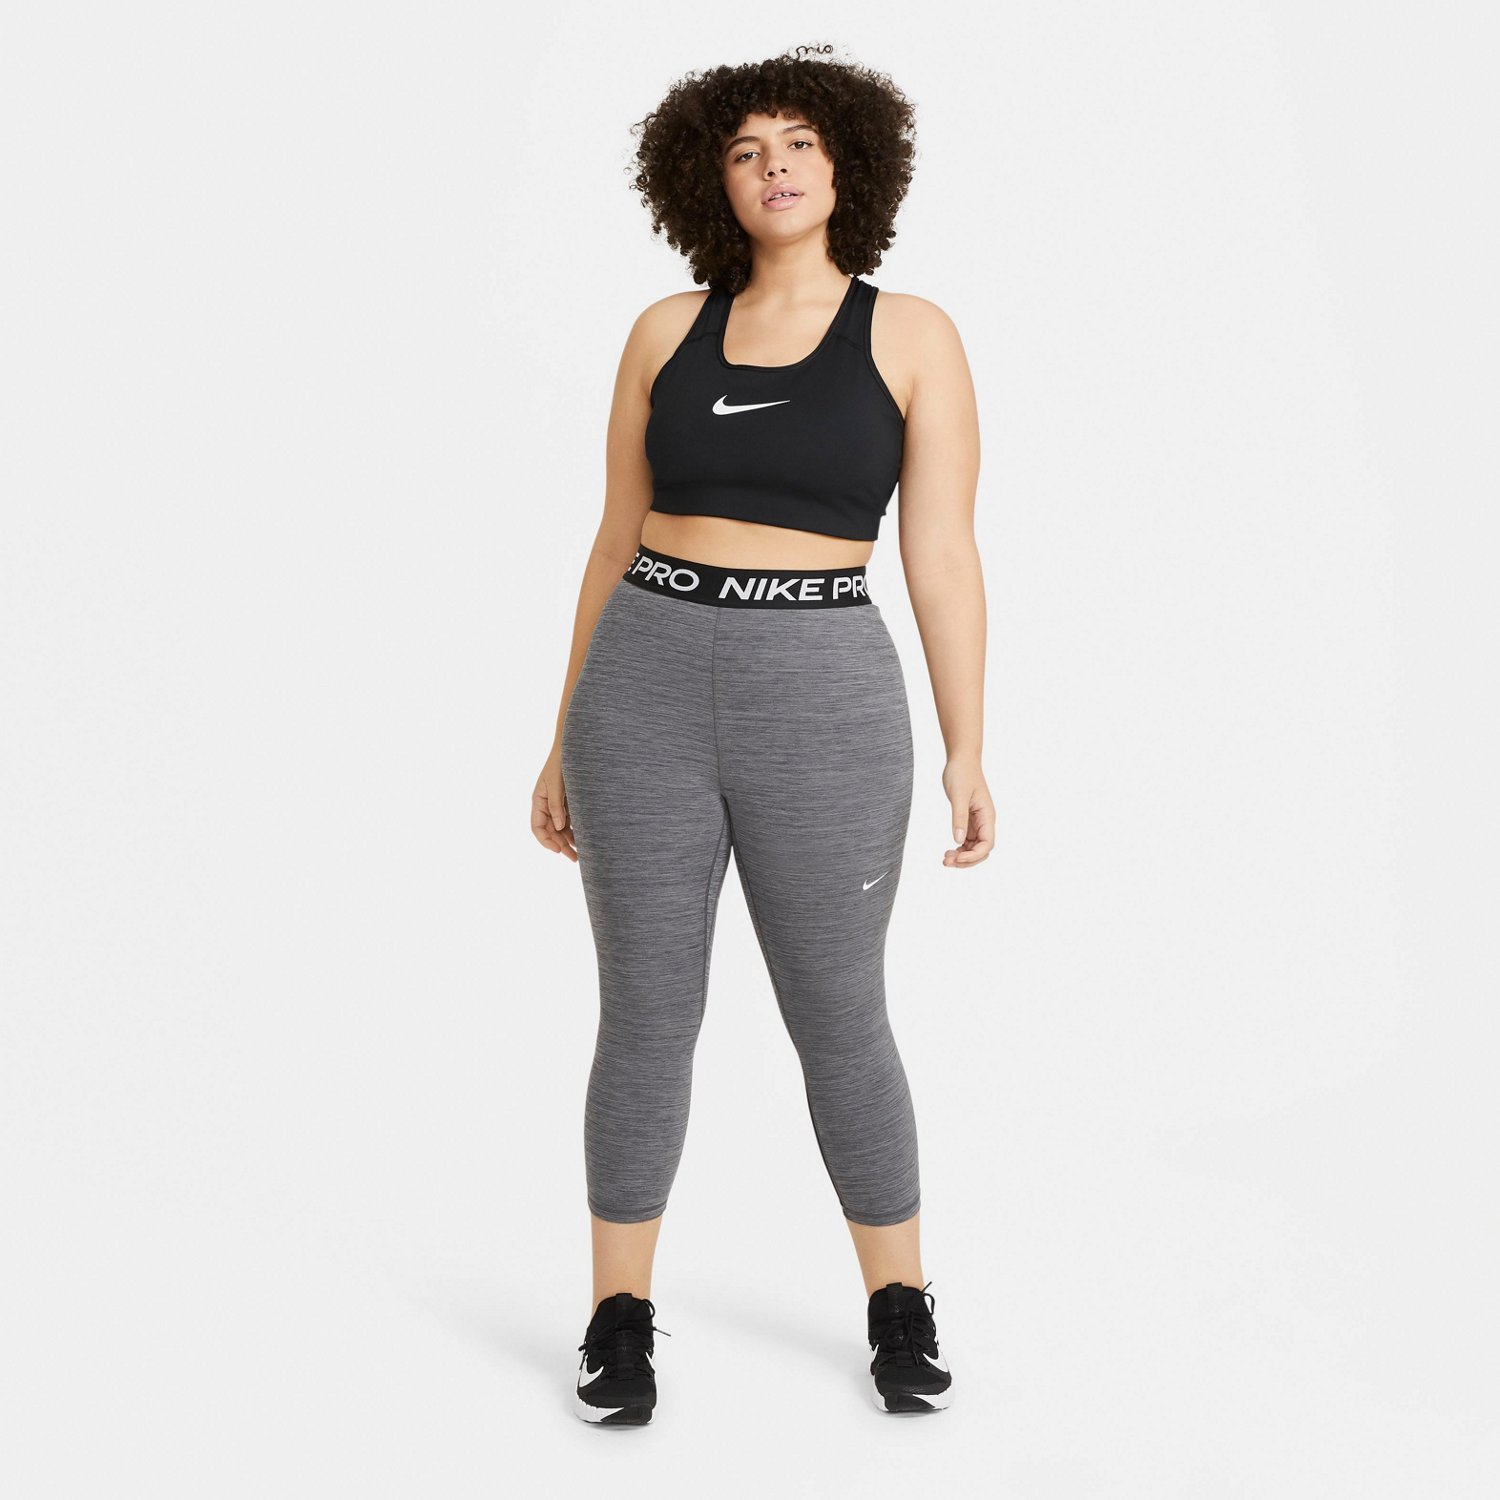 Nike Women'sPro 365 Cropped Tights | Free Shipping at Academy